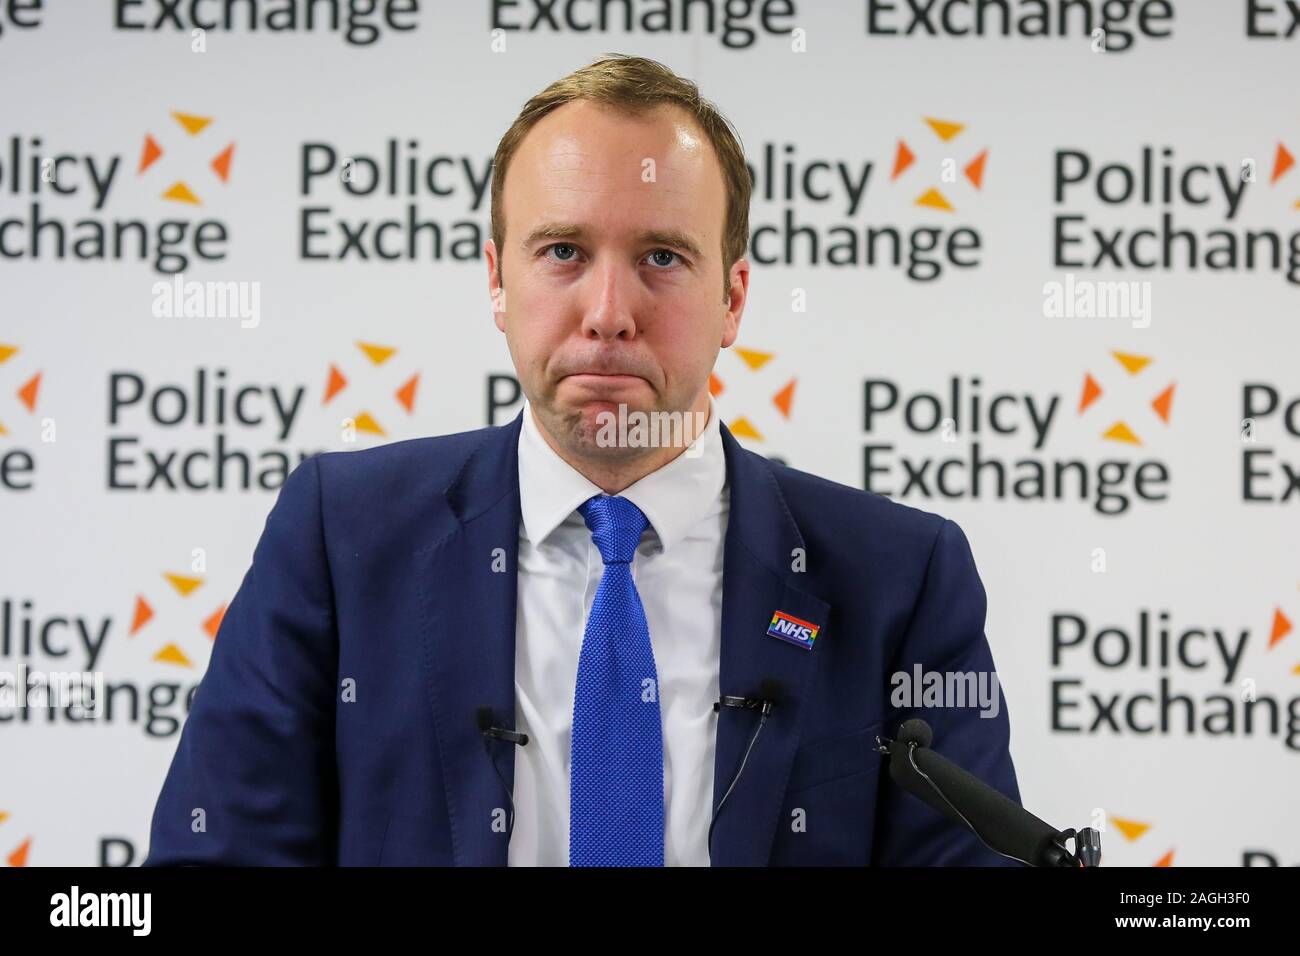 Secretary of State for Health and Social Care, Matt Hancock speaks during the Policy Exchange outlining Tory plans on the National Health Service, following the 2019 General Election in which the Conservative Party won a majority.Matt Hancock announced extra government funding for the National Health Service (NHS) and recruitment for new staff and infrastructure. Stock Photo